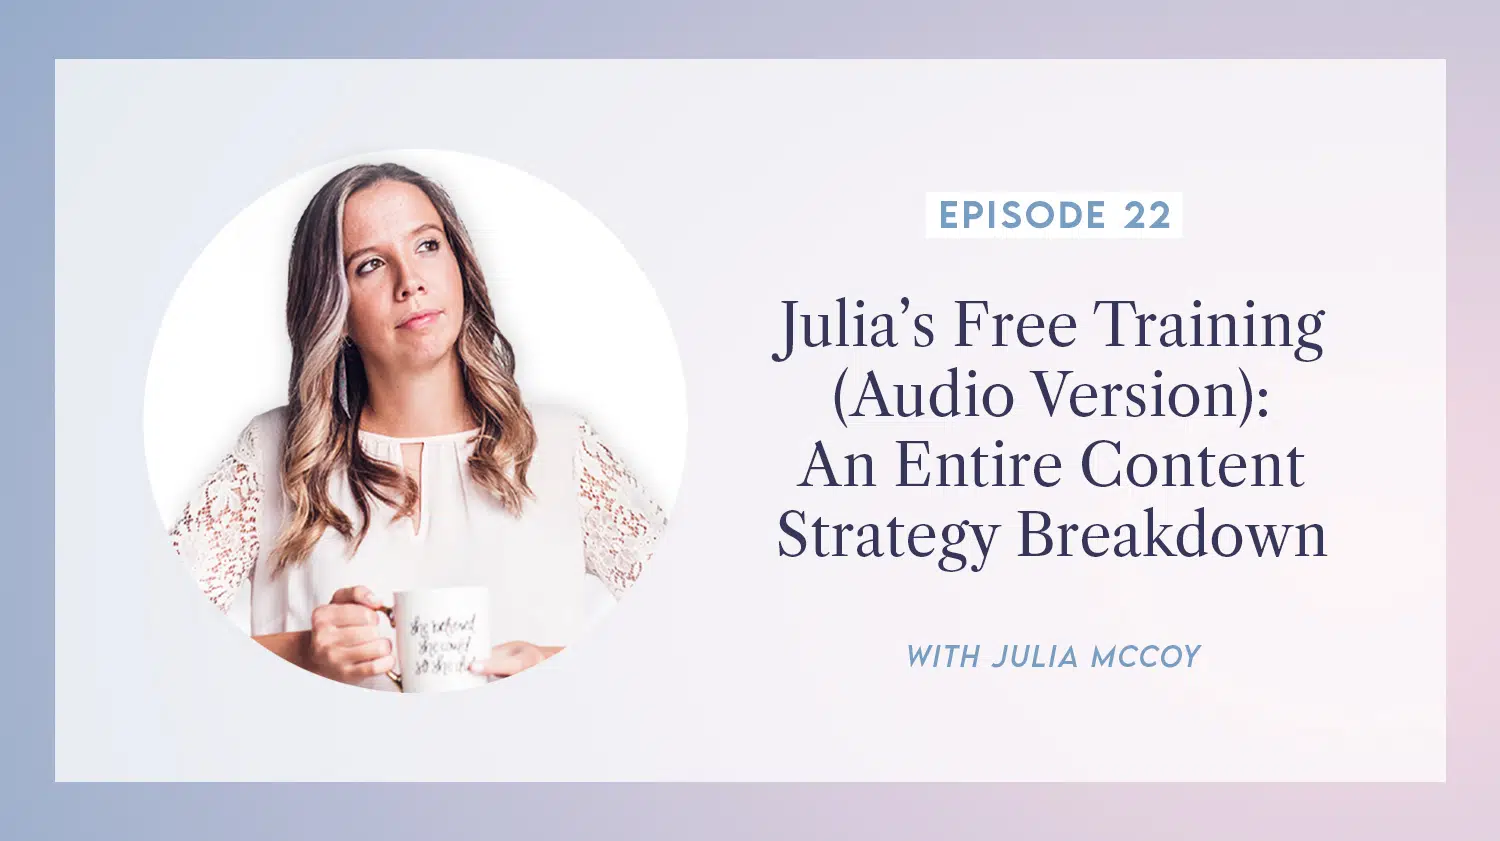 content transformation podcast with julia mccoy episode 22 julia’s free training (audio version) an entire content strategy breakdown